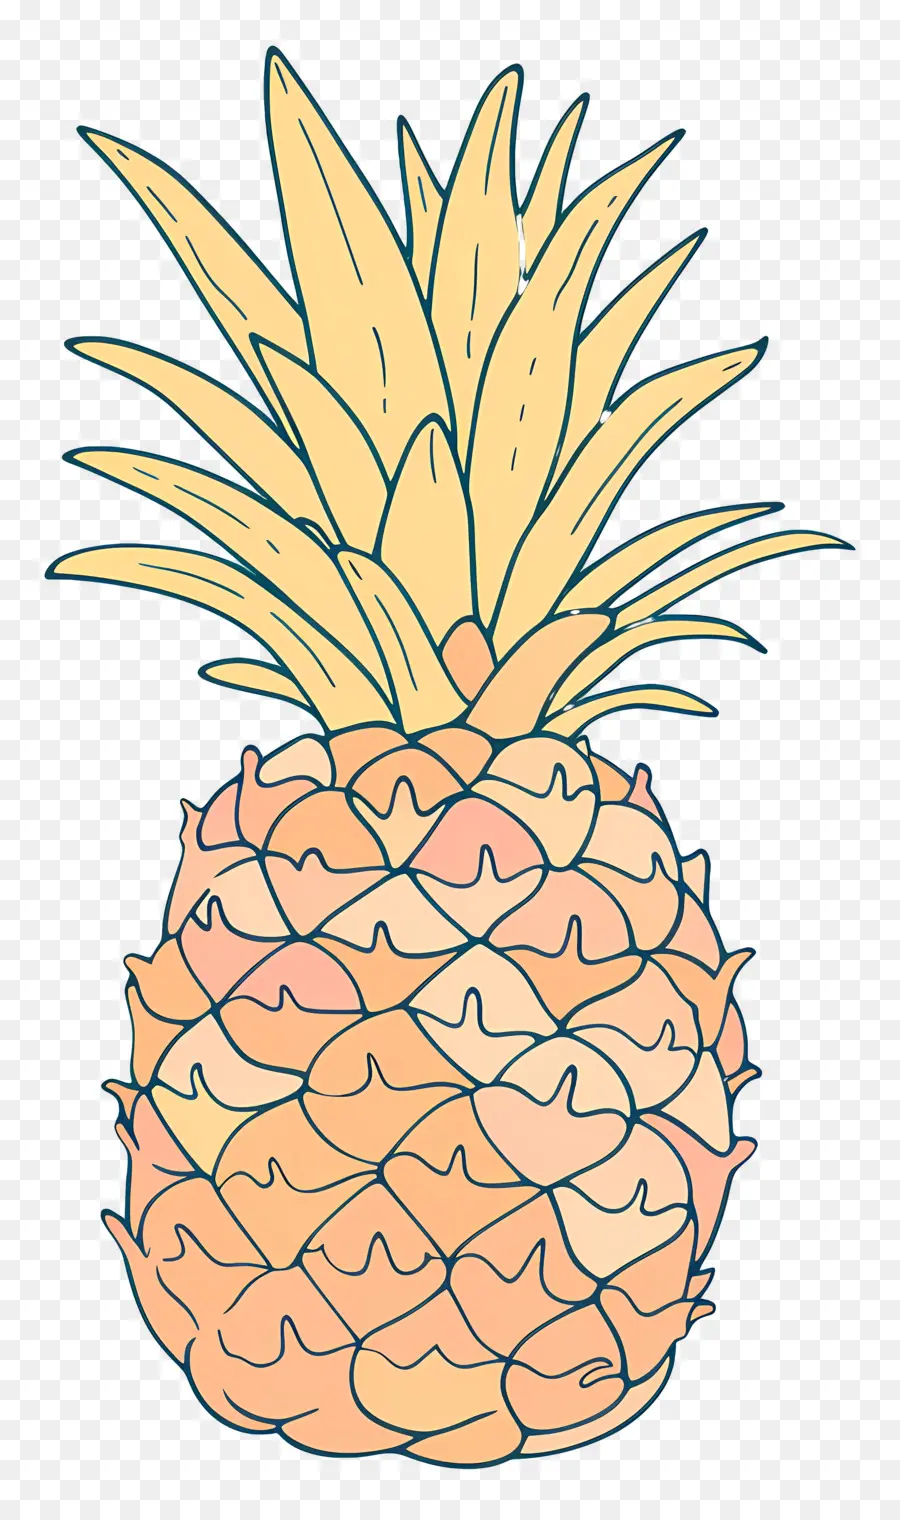 L'ananas，Ovale PNG